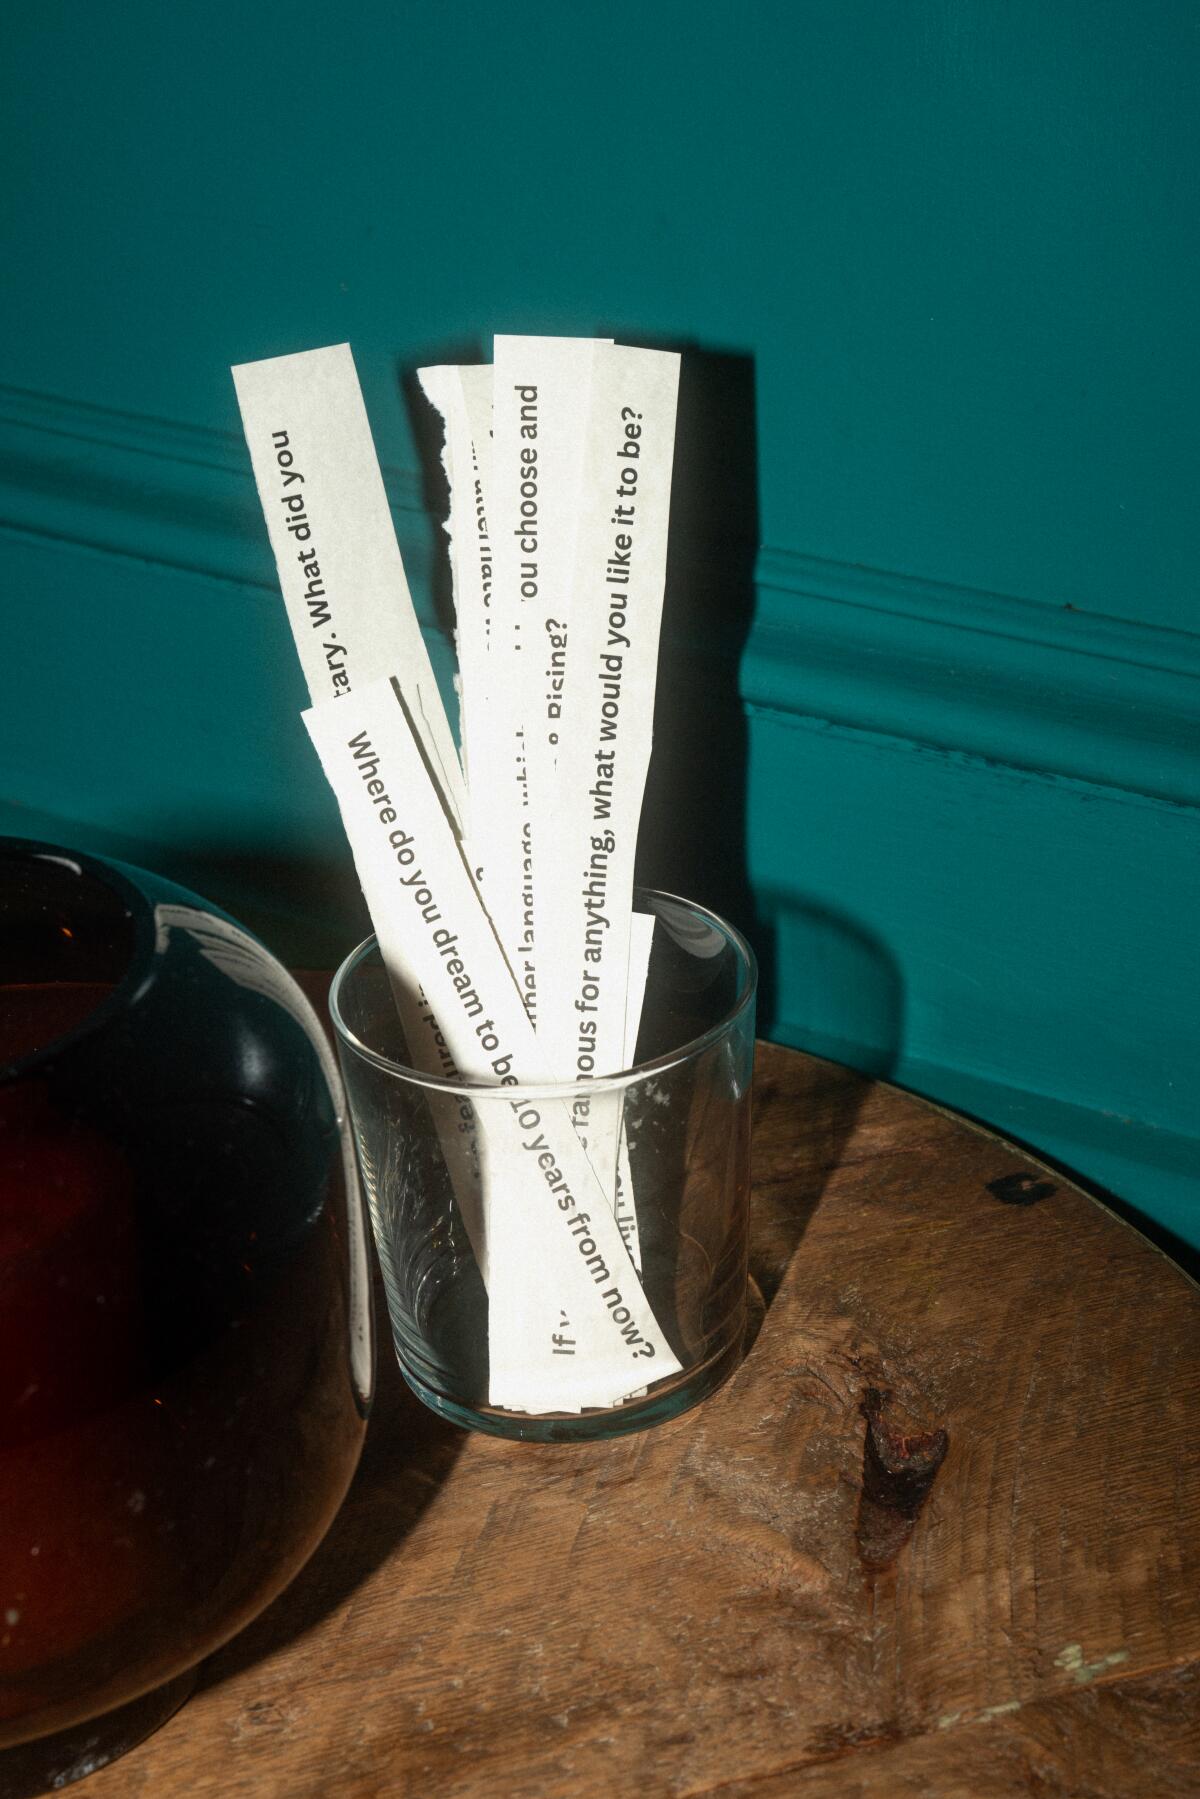 Pieces of paper with sentences typed on them stand in a glass on a table